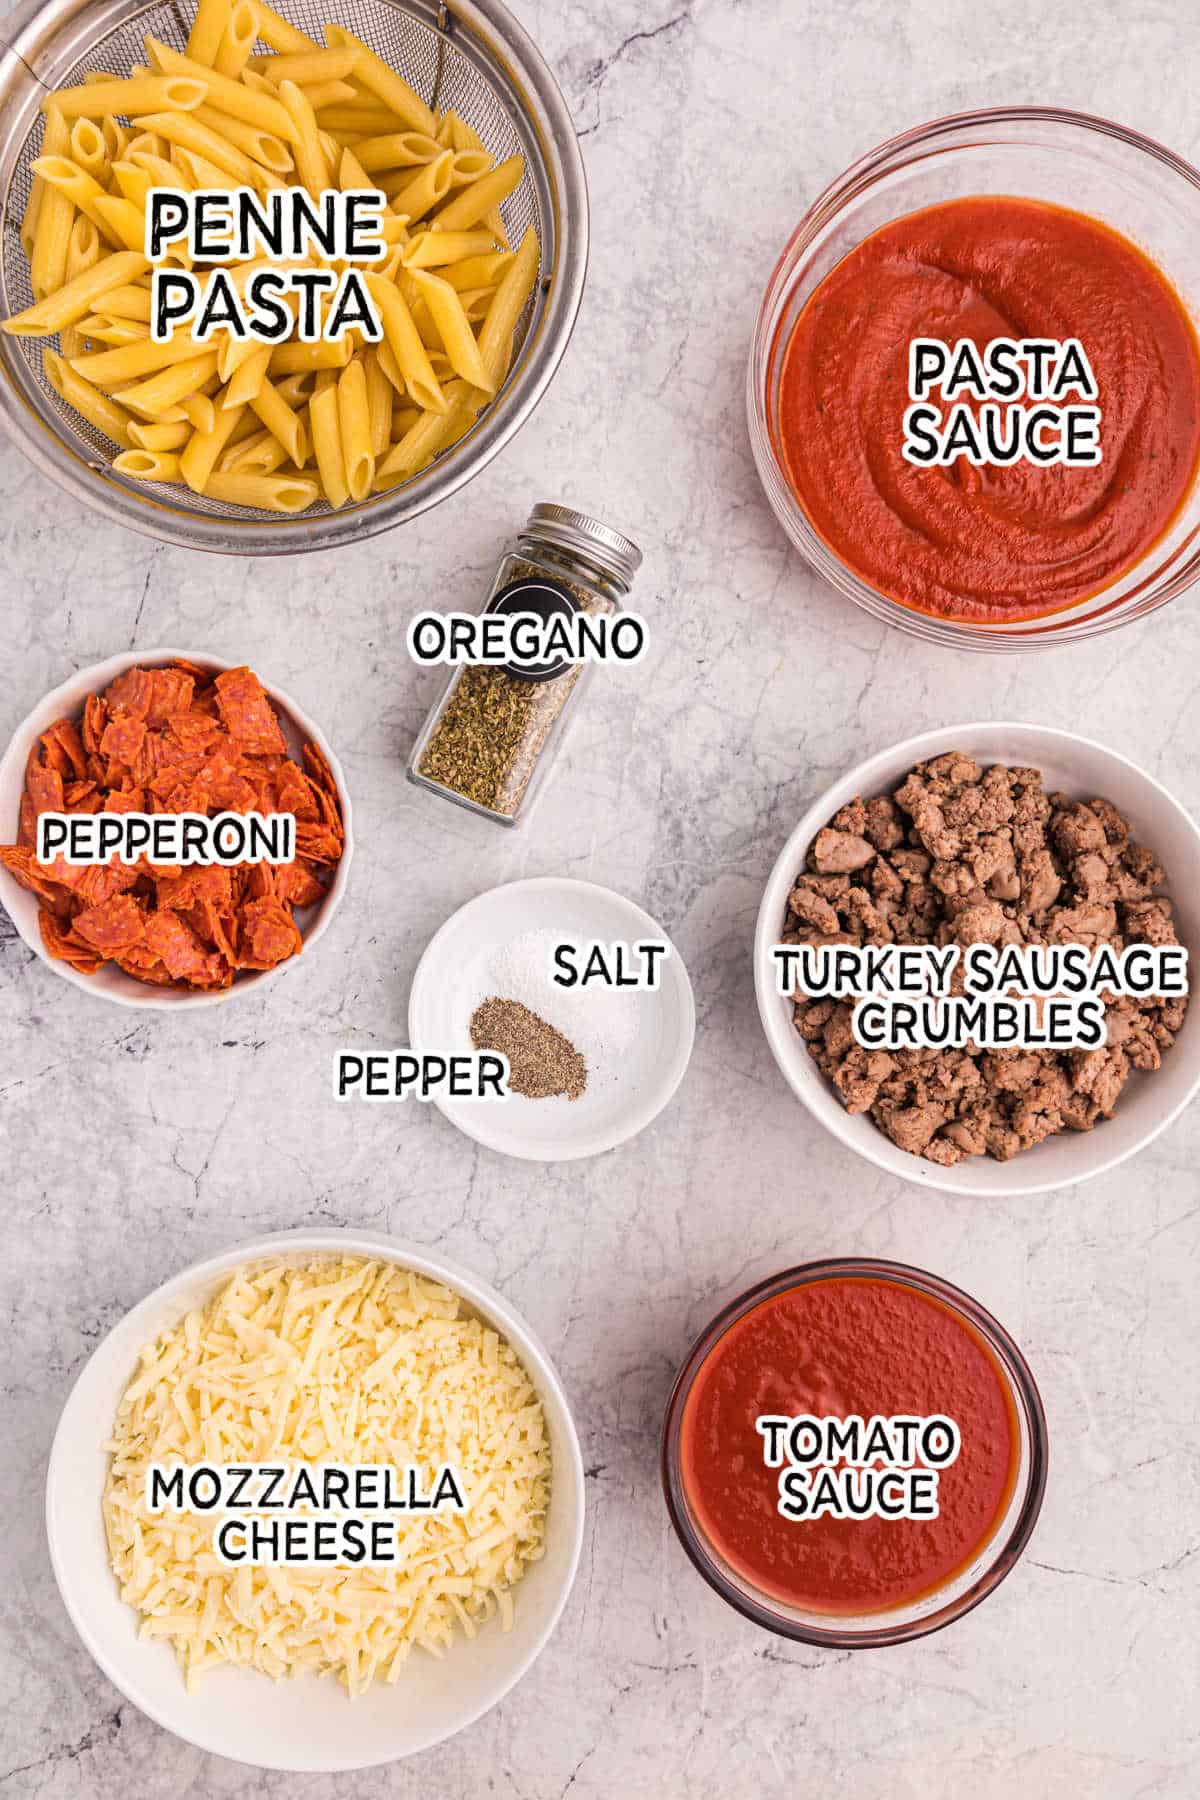 Ingredients to make slow cooker pizza pasta.